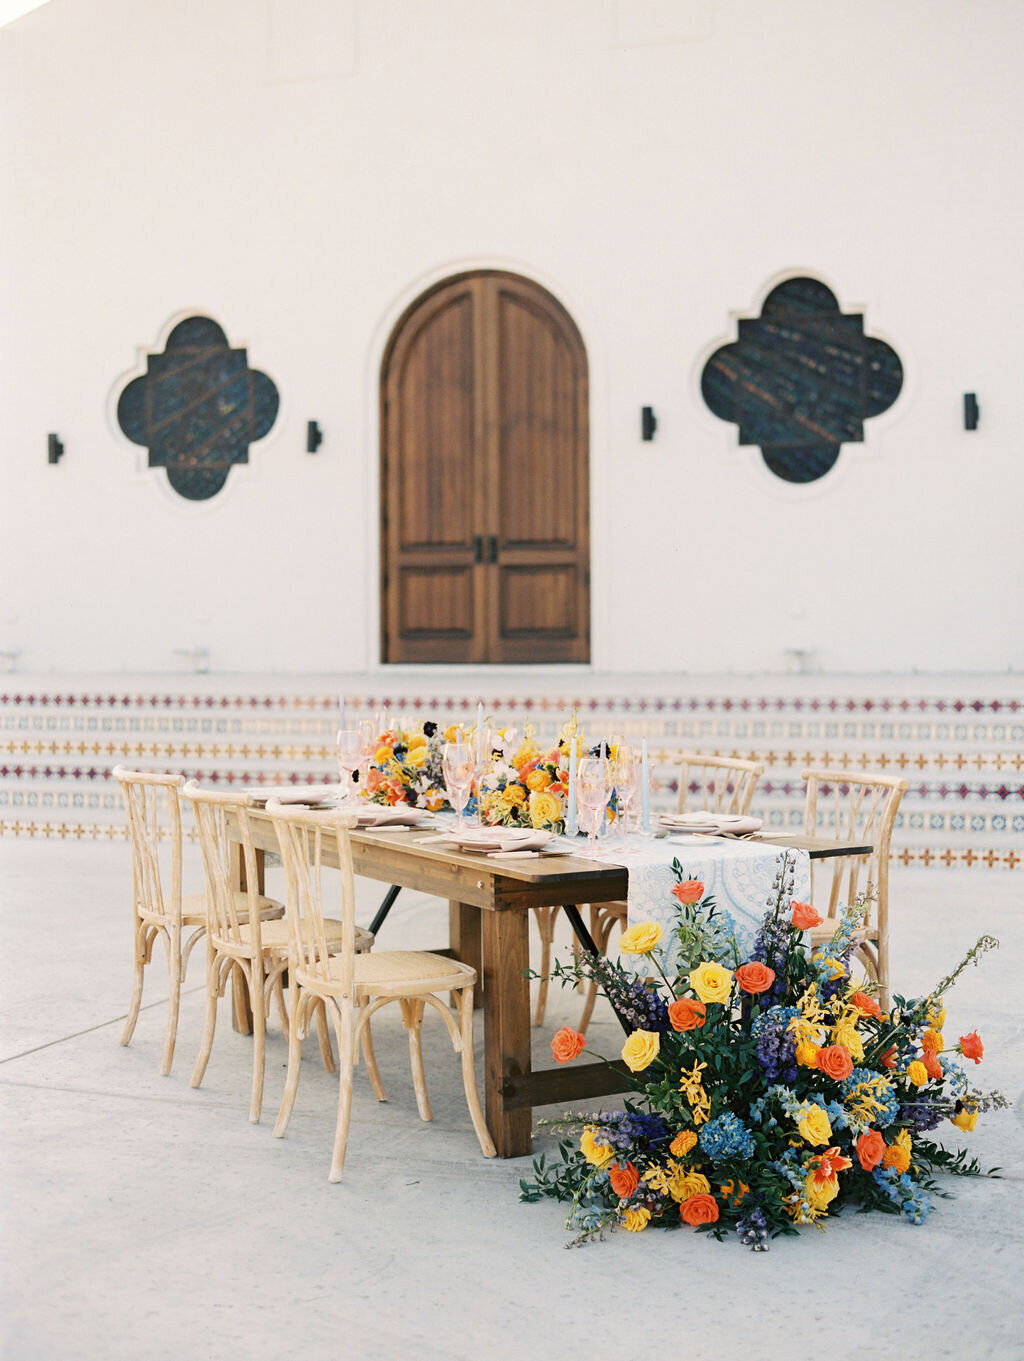 outdoor farm table at wedding with bright flowers and place settings